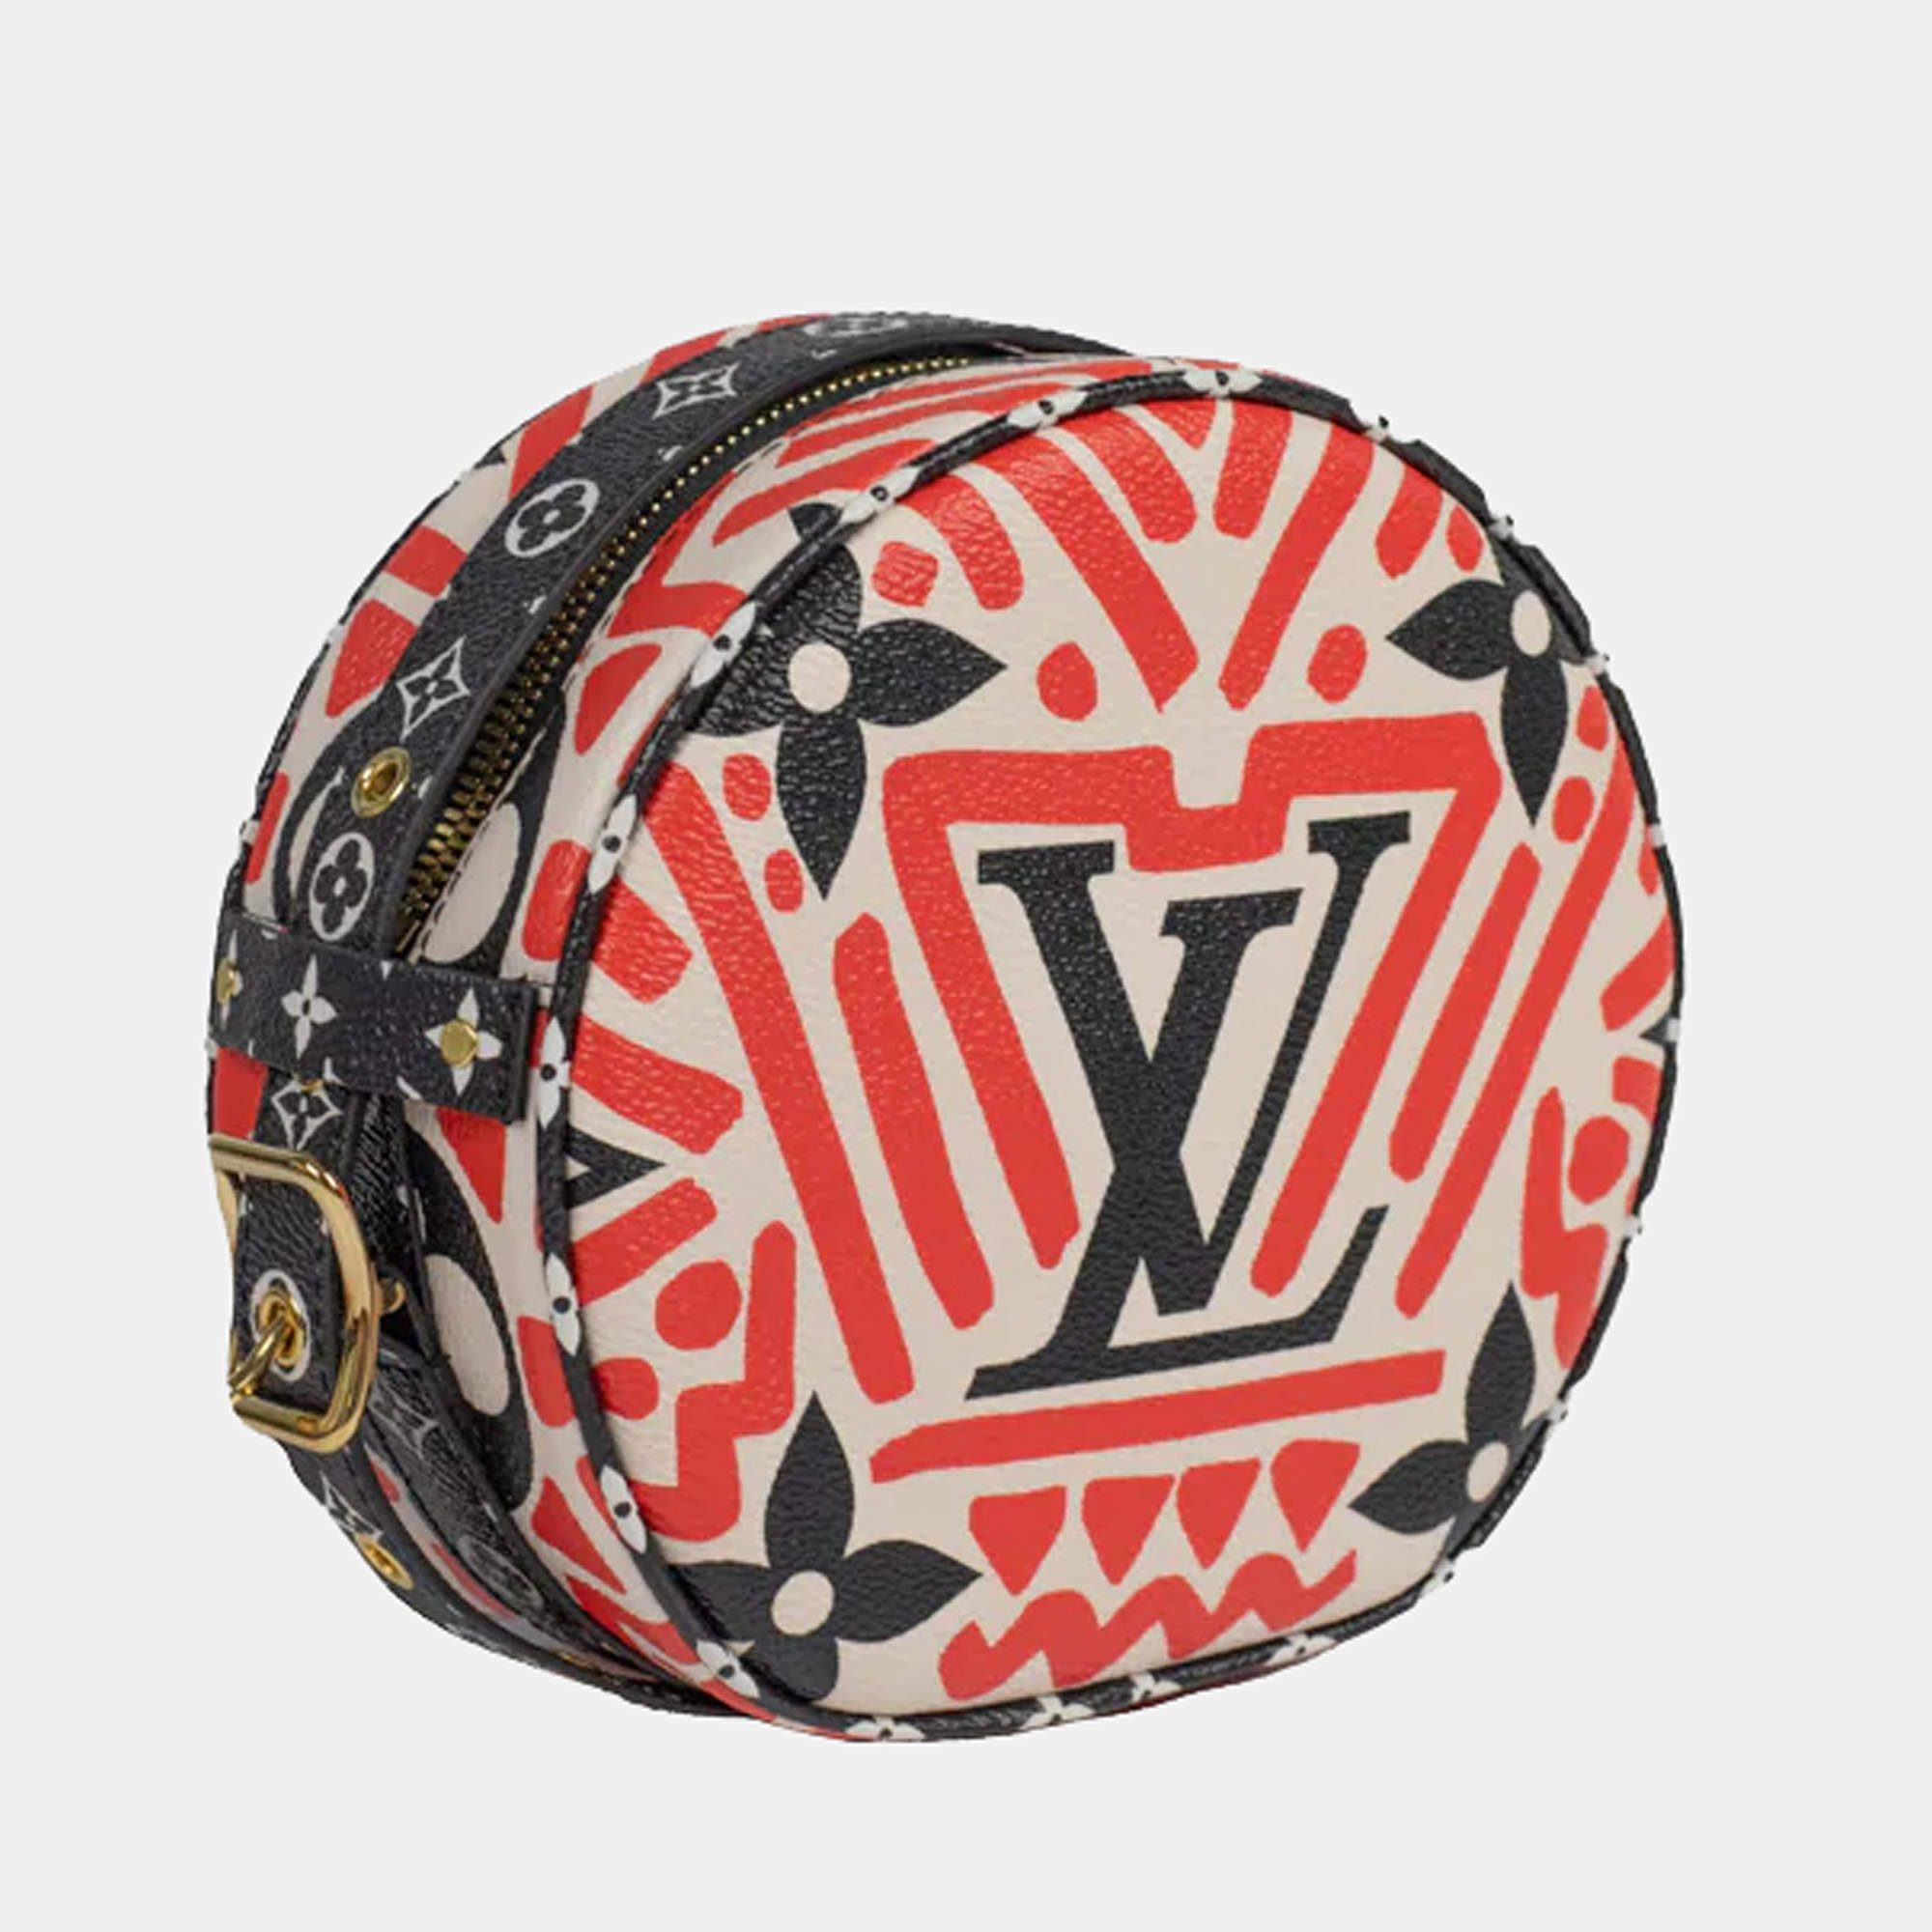 Louis Vuitton Red, White, Black, And Pink Crafty Giant Monogram